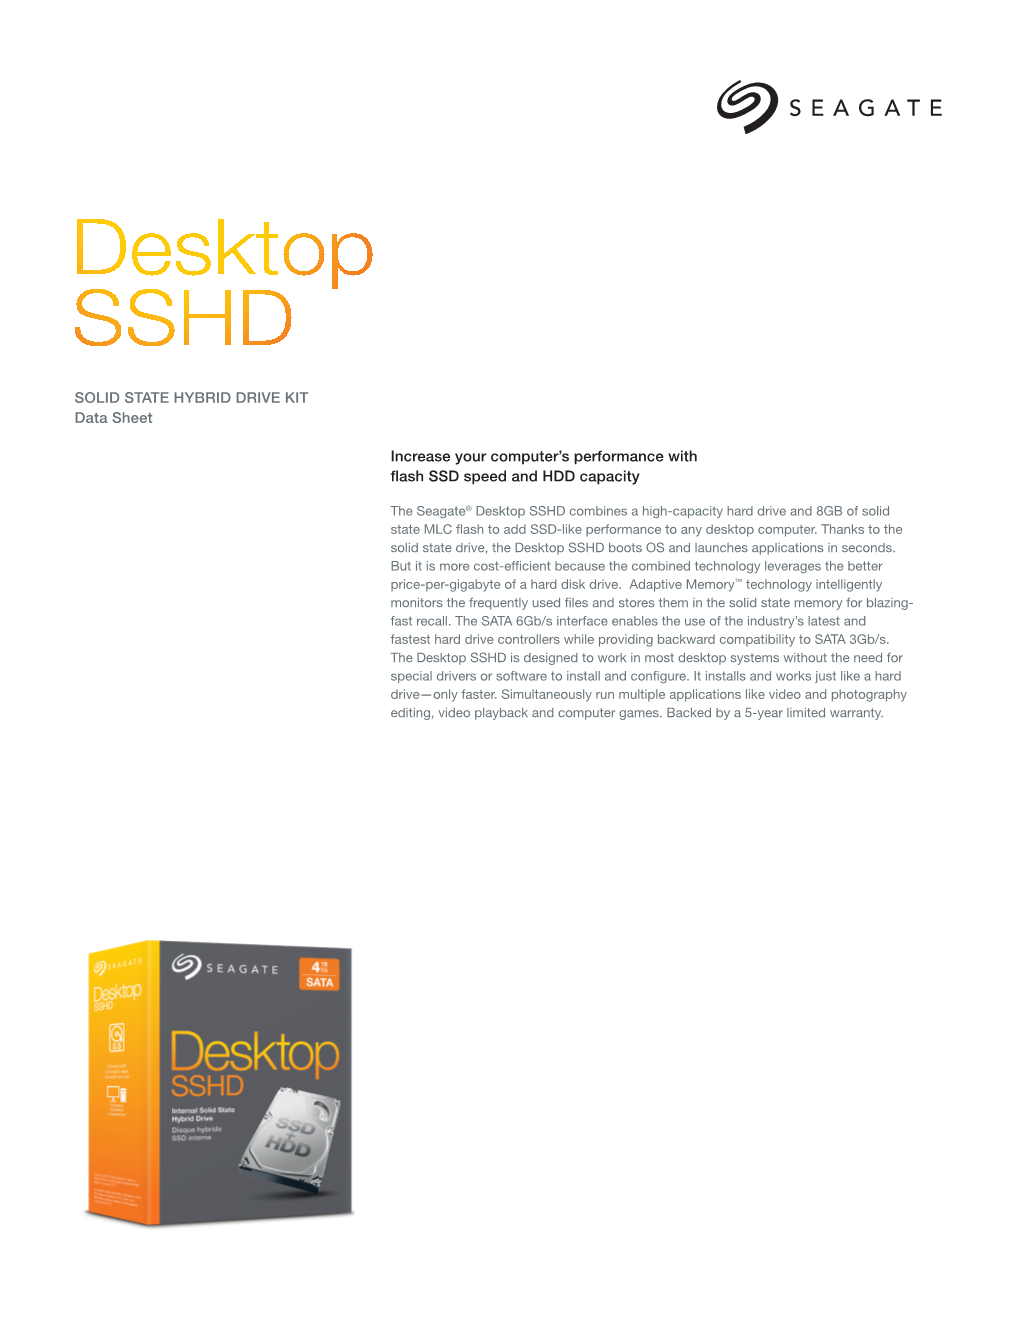 SOLID STATE HYBRID DRIVE KIT Data Sheet Increase Your Computer's Performance with Flash SSD Speed and HDD Capacity